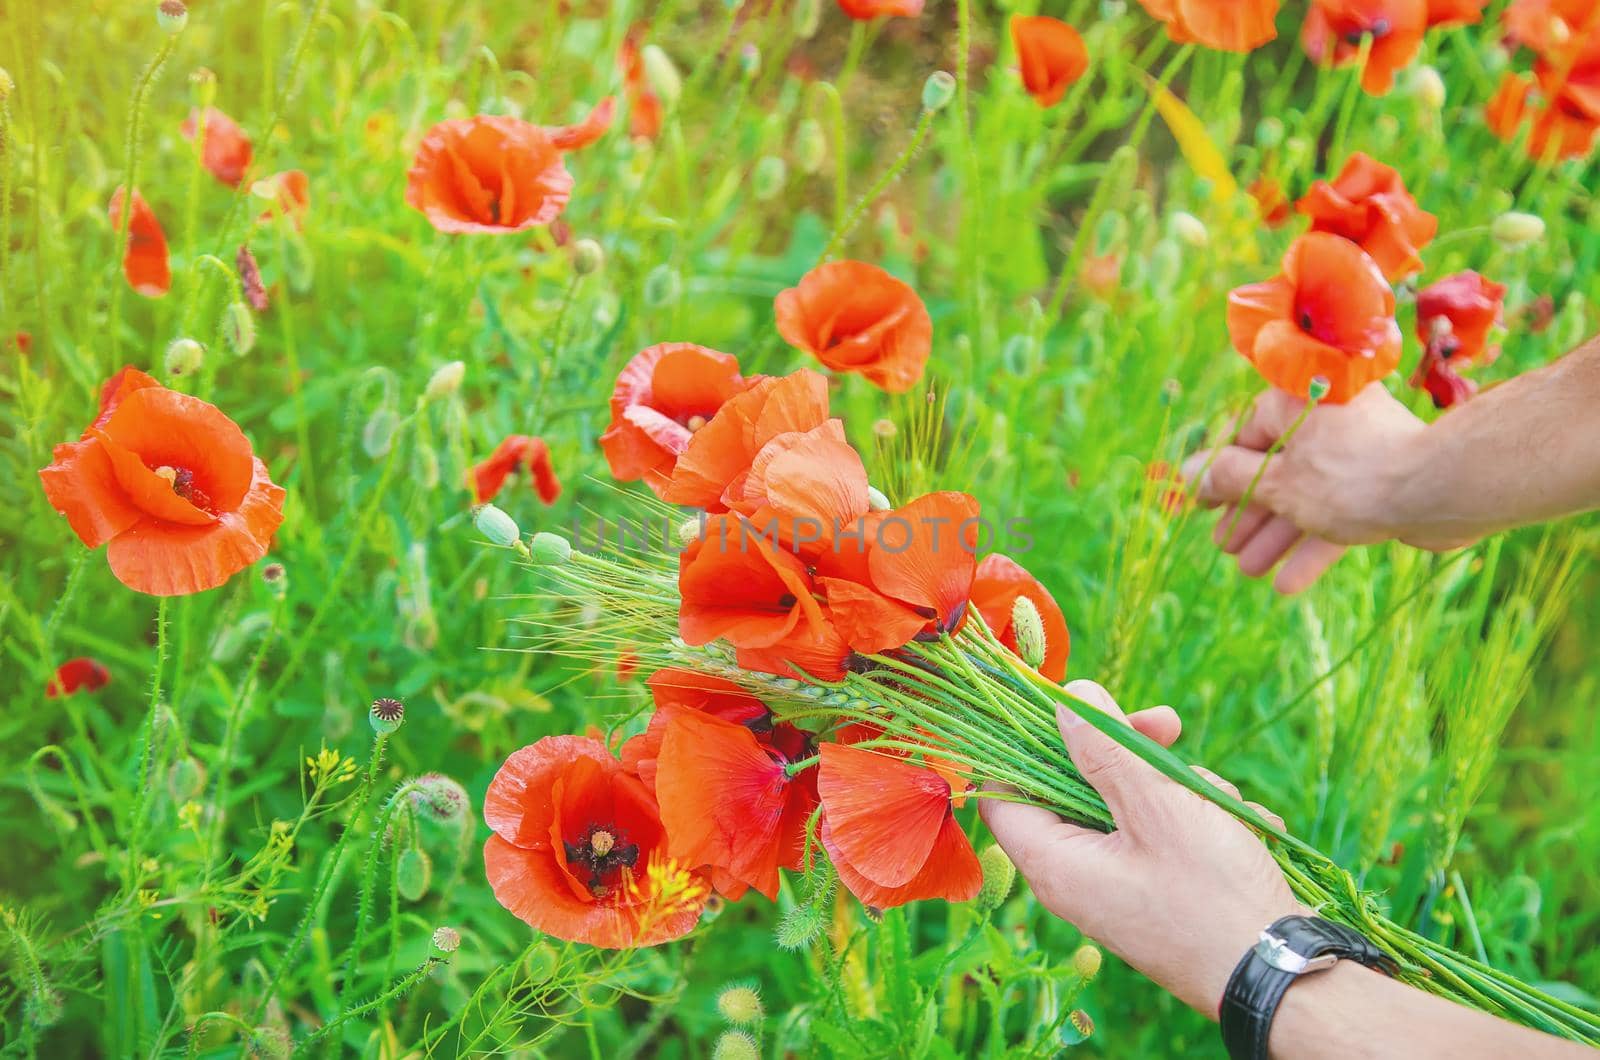 man collects a bouquet of wildflowers. Poppies selective focus. nature.